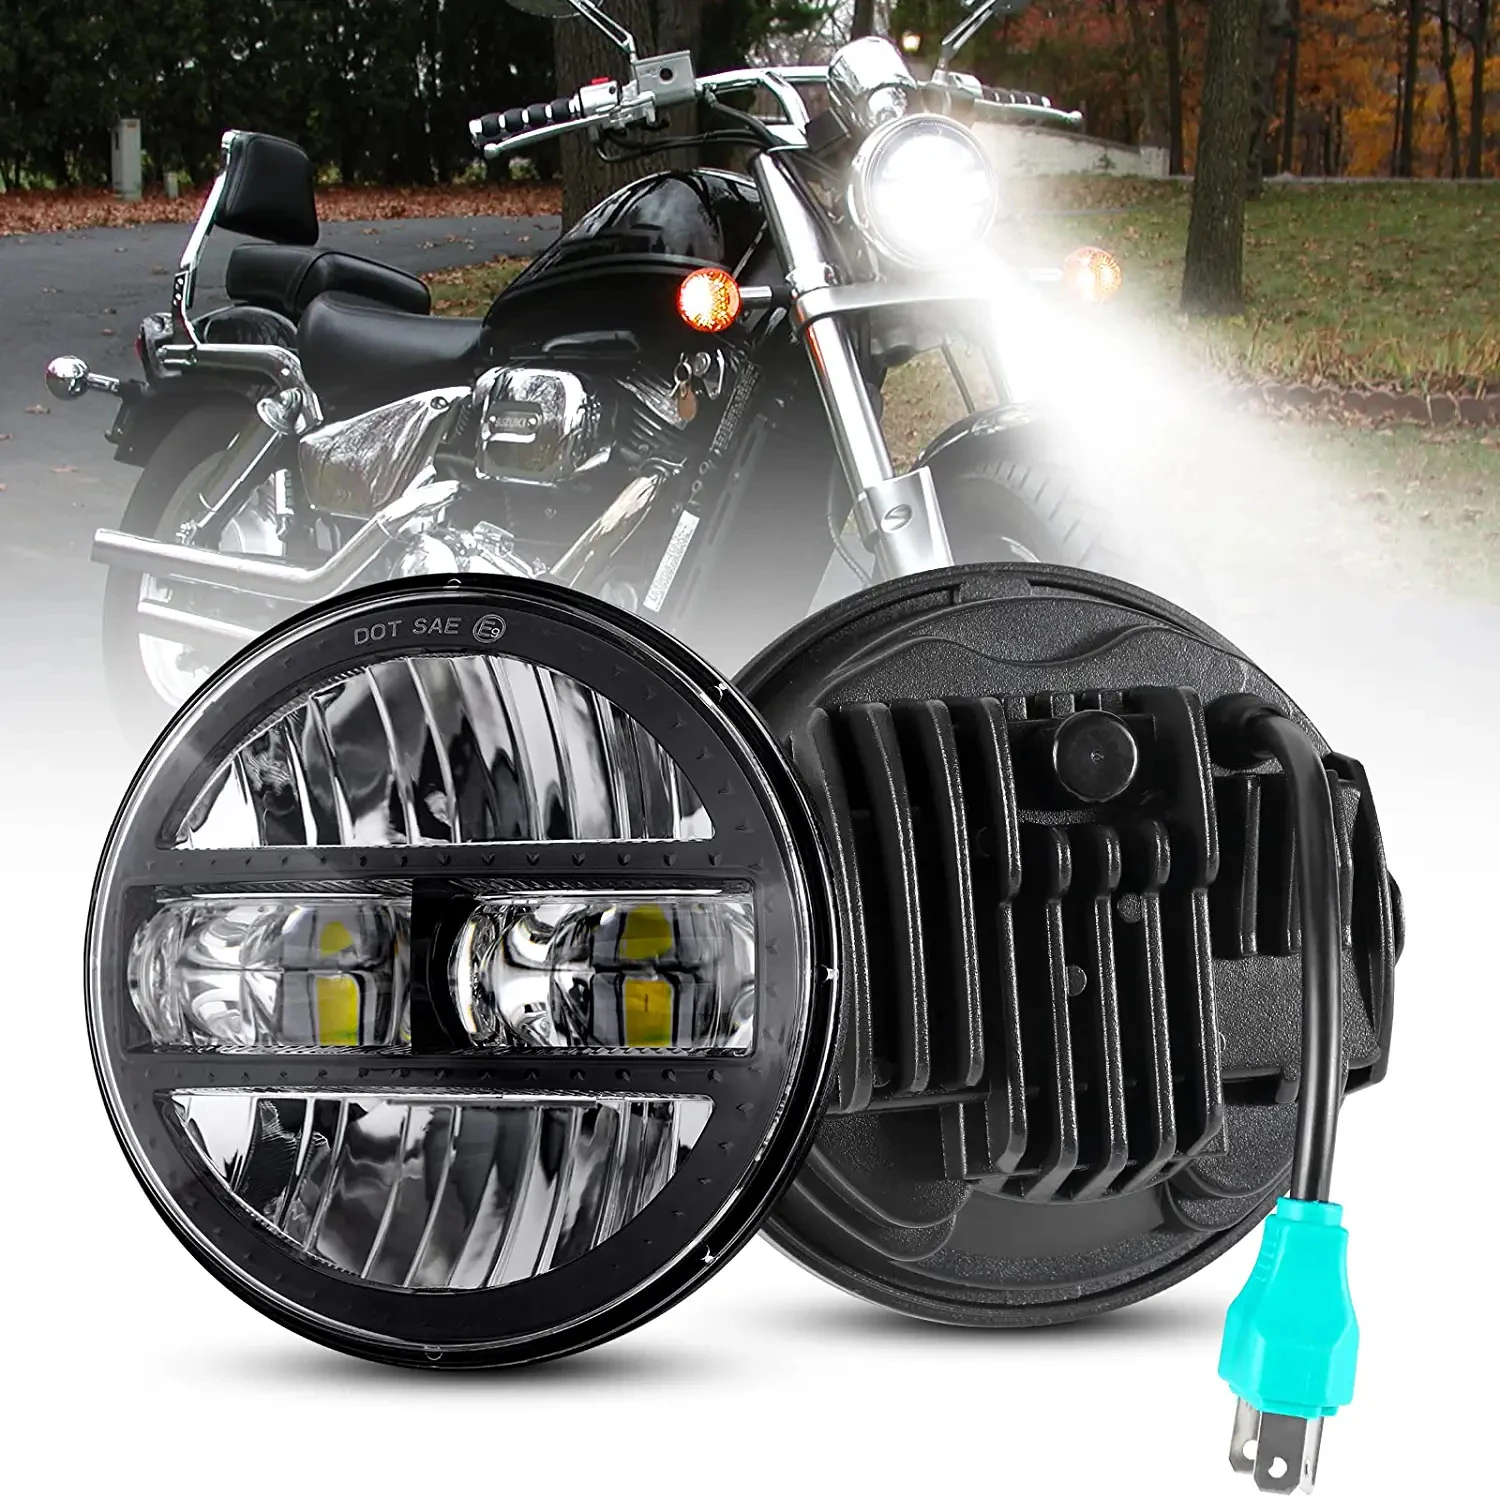 5.75 Inch LED Headlight for Harley Sportster Dyna Iron 883 1200 Moto 5 3/4" Headlamp With Hi-Low Beam DRL Turn Signal